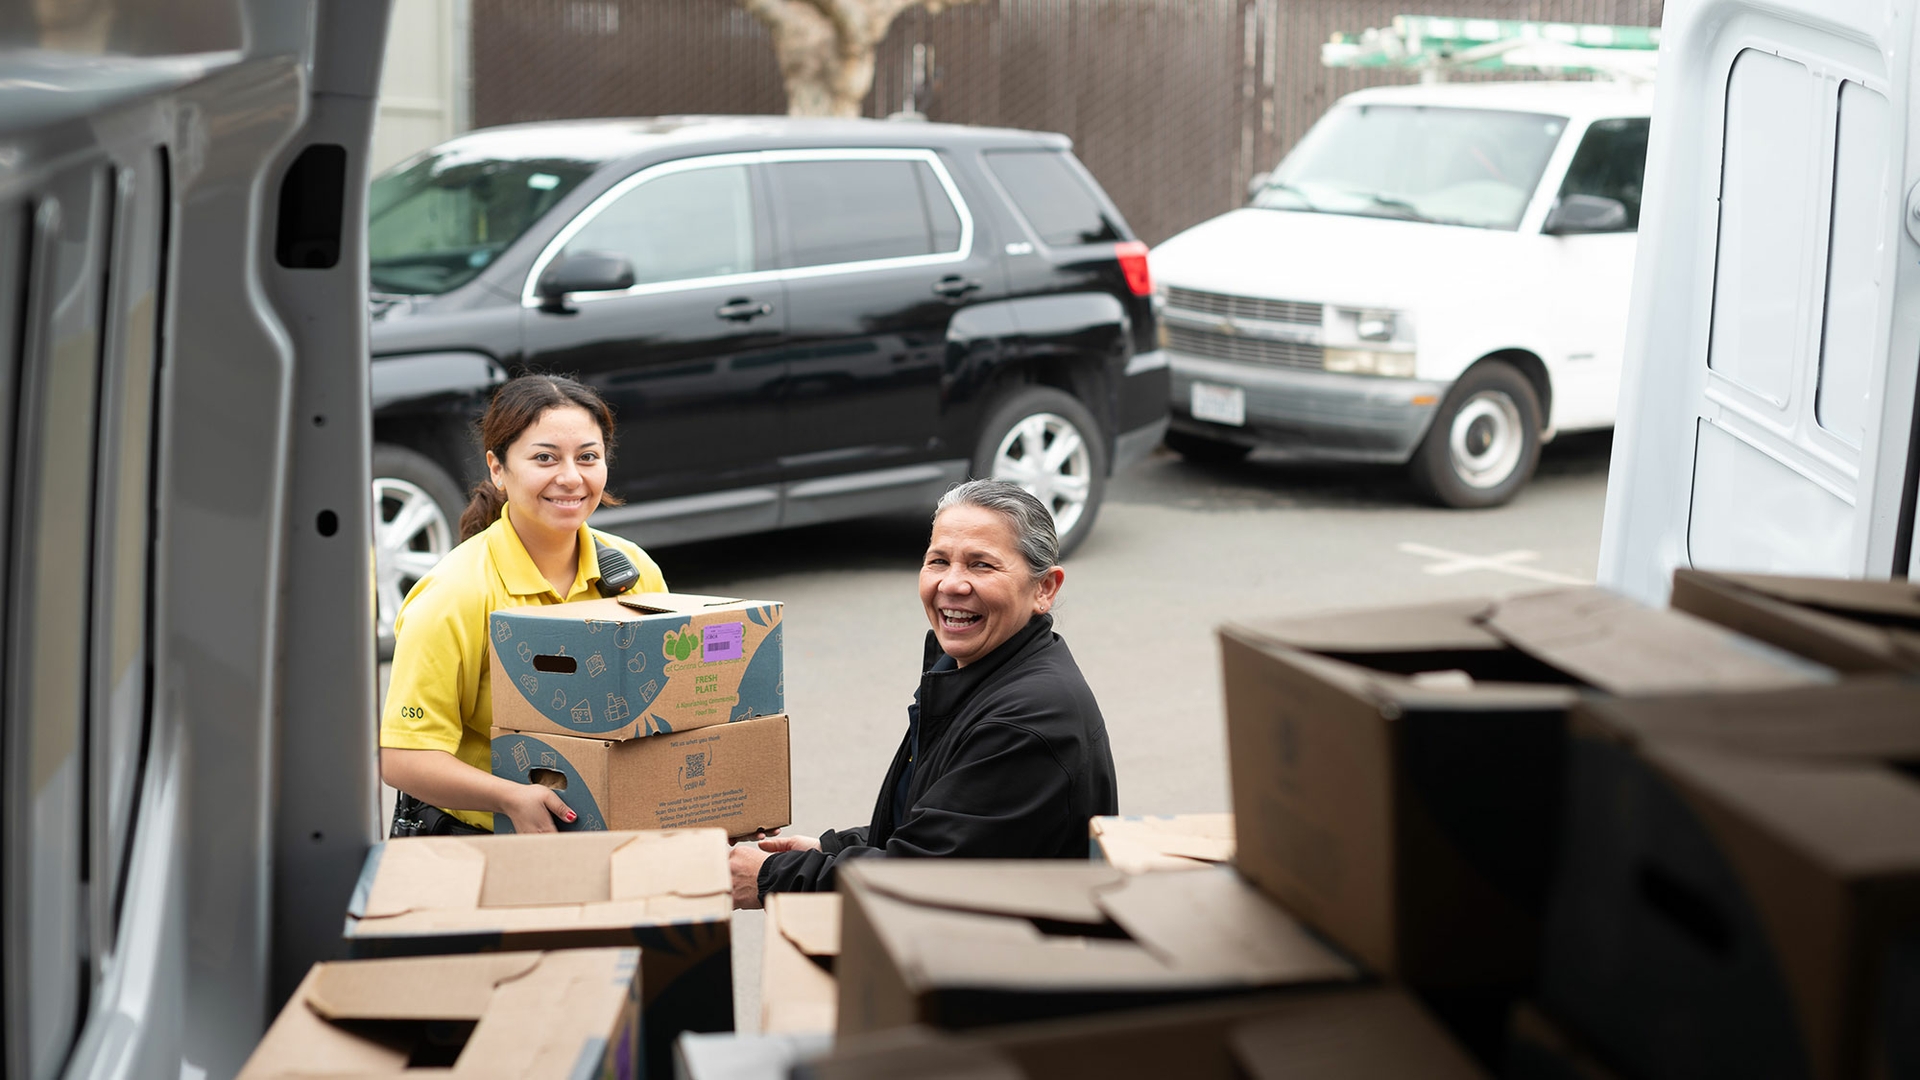 A photo shows two smiling people unloading boxes from the back of a van.